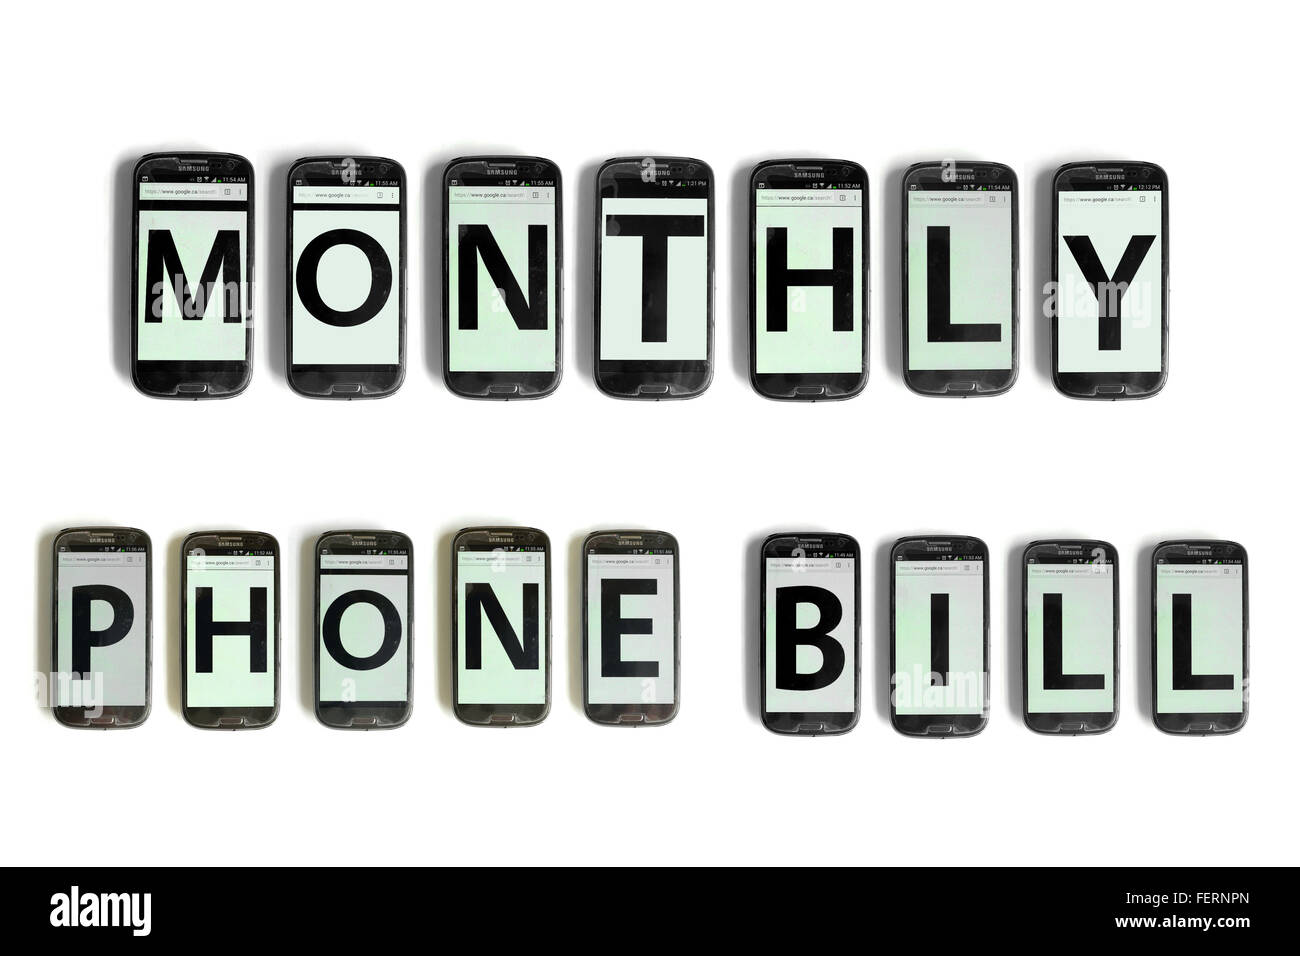 Monthly Phone Bill on the screens of smartphones photographed against a white background. Stock Photo